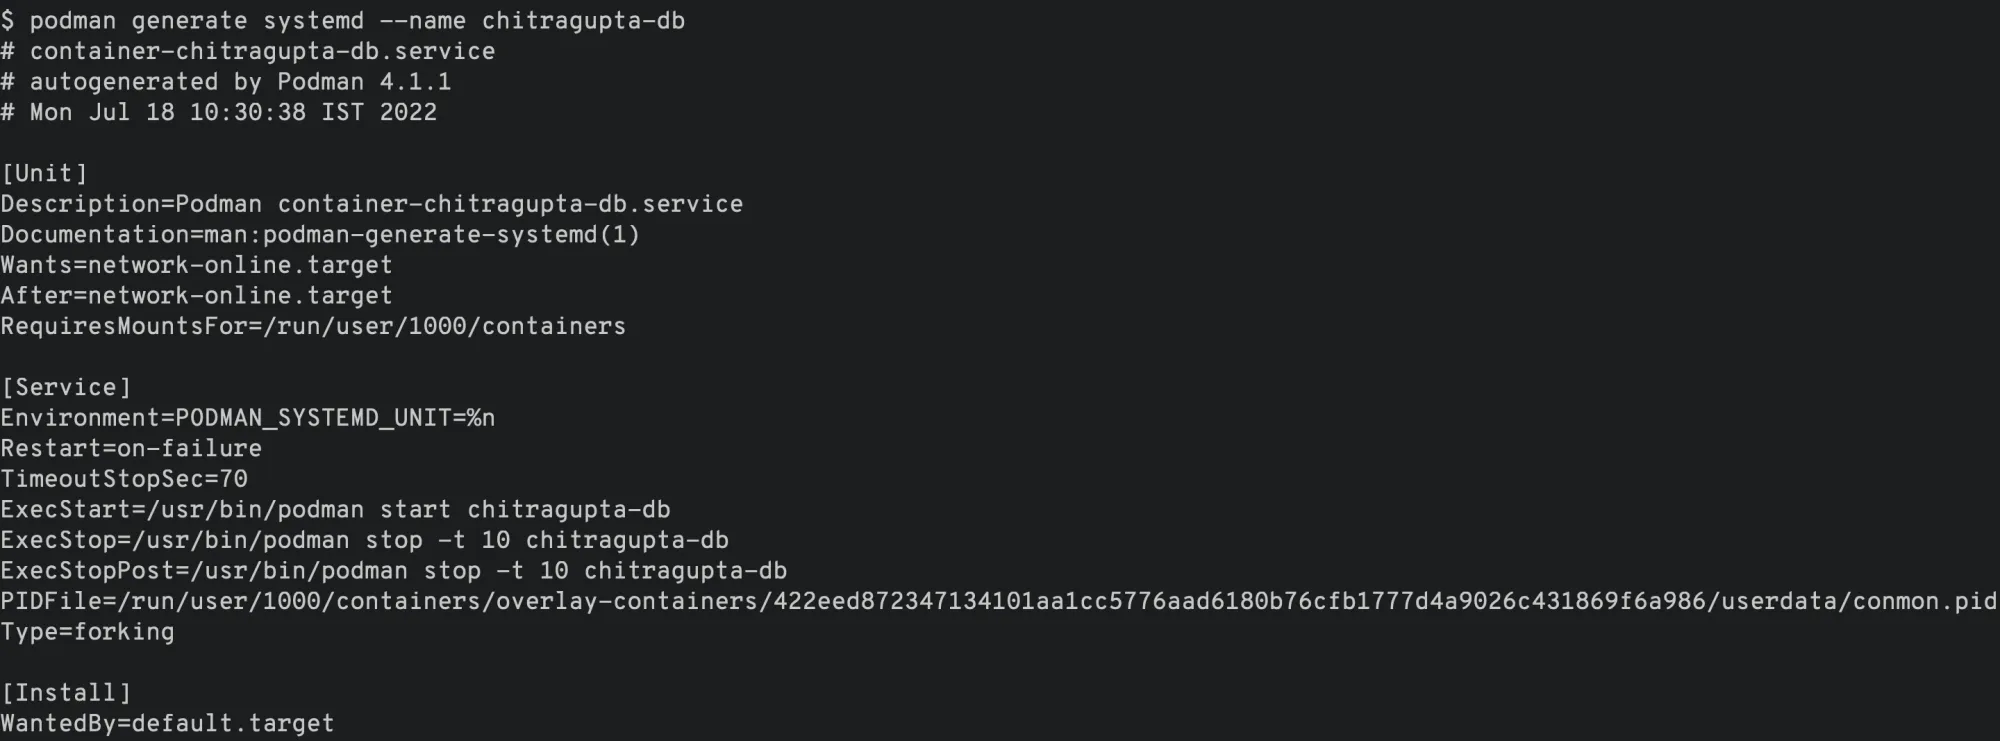 output of running the `podman generate systemd` command for my container